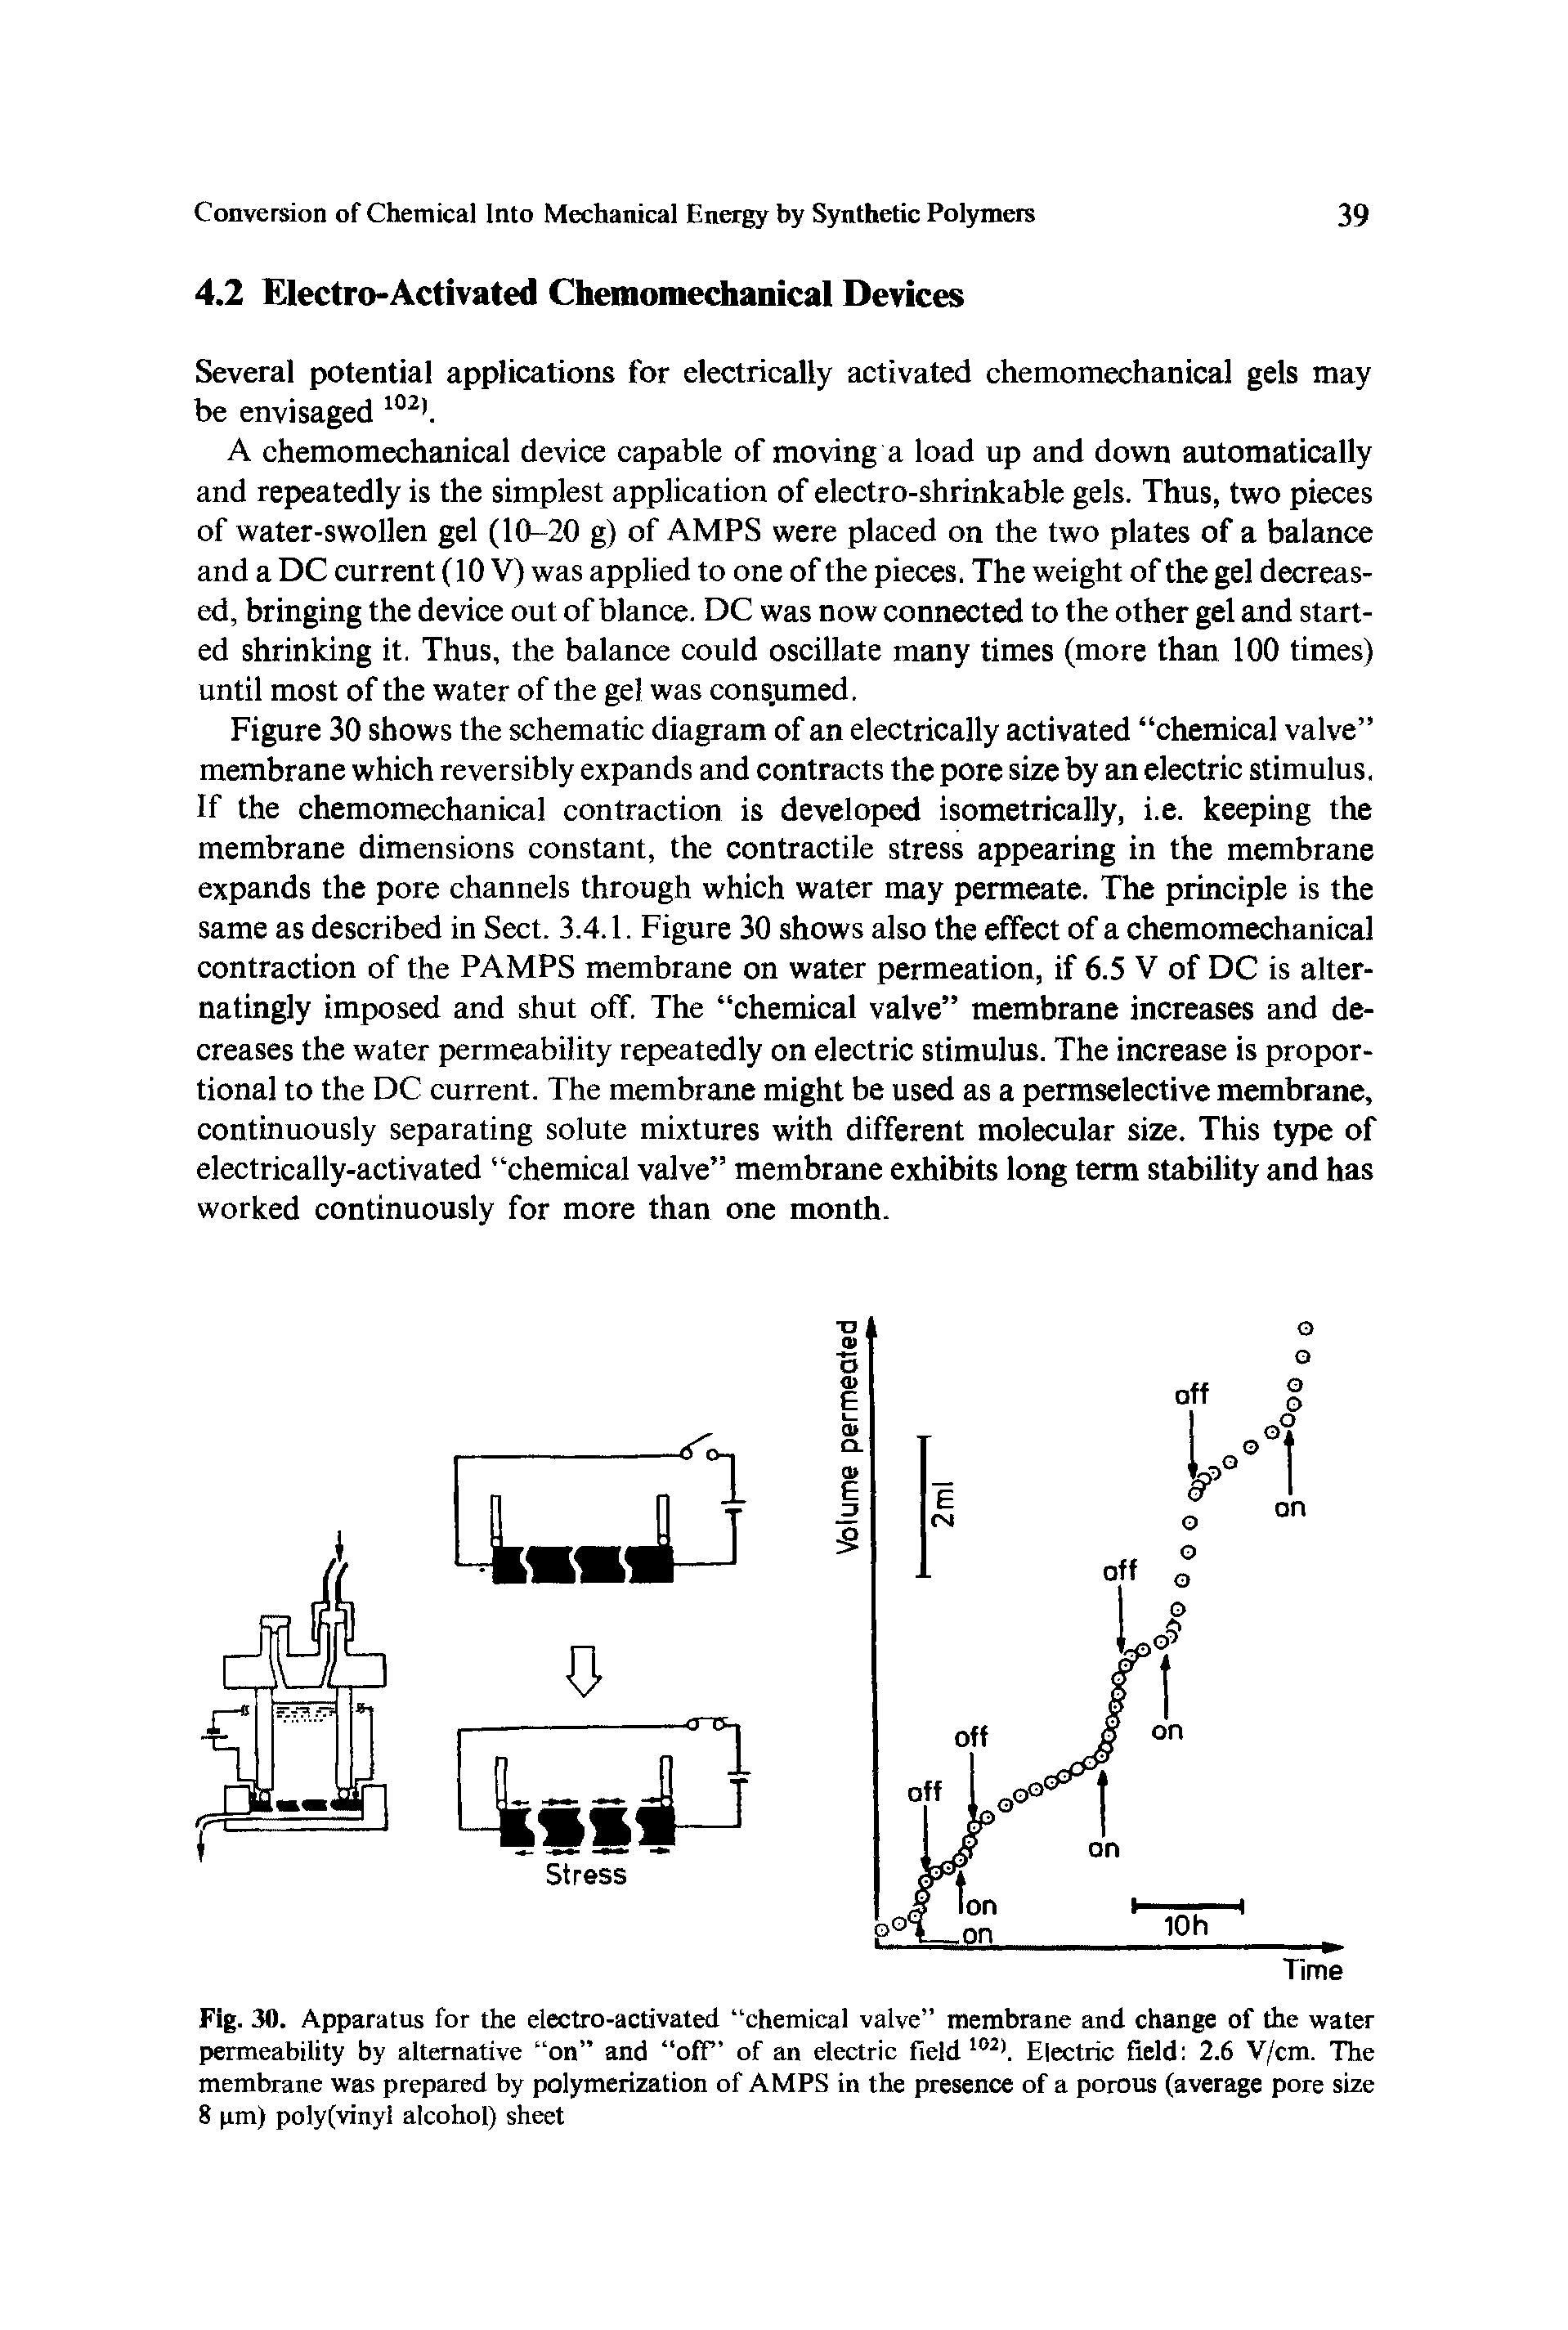 Fig. 30. Apparatus for the electro-activated chemical valve membrane and change of the water permeability by alternative on and off of an electric field Electric field 2.6 V/cm. The membrane was prepared by polymerization of AMPS in the presence of a porous (average pore size 8 pm) polyfvinyl alcohol) sheet...